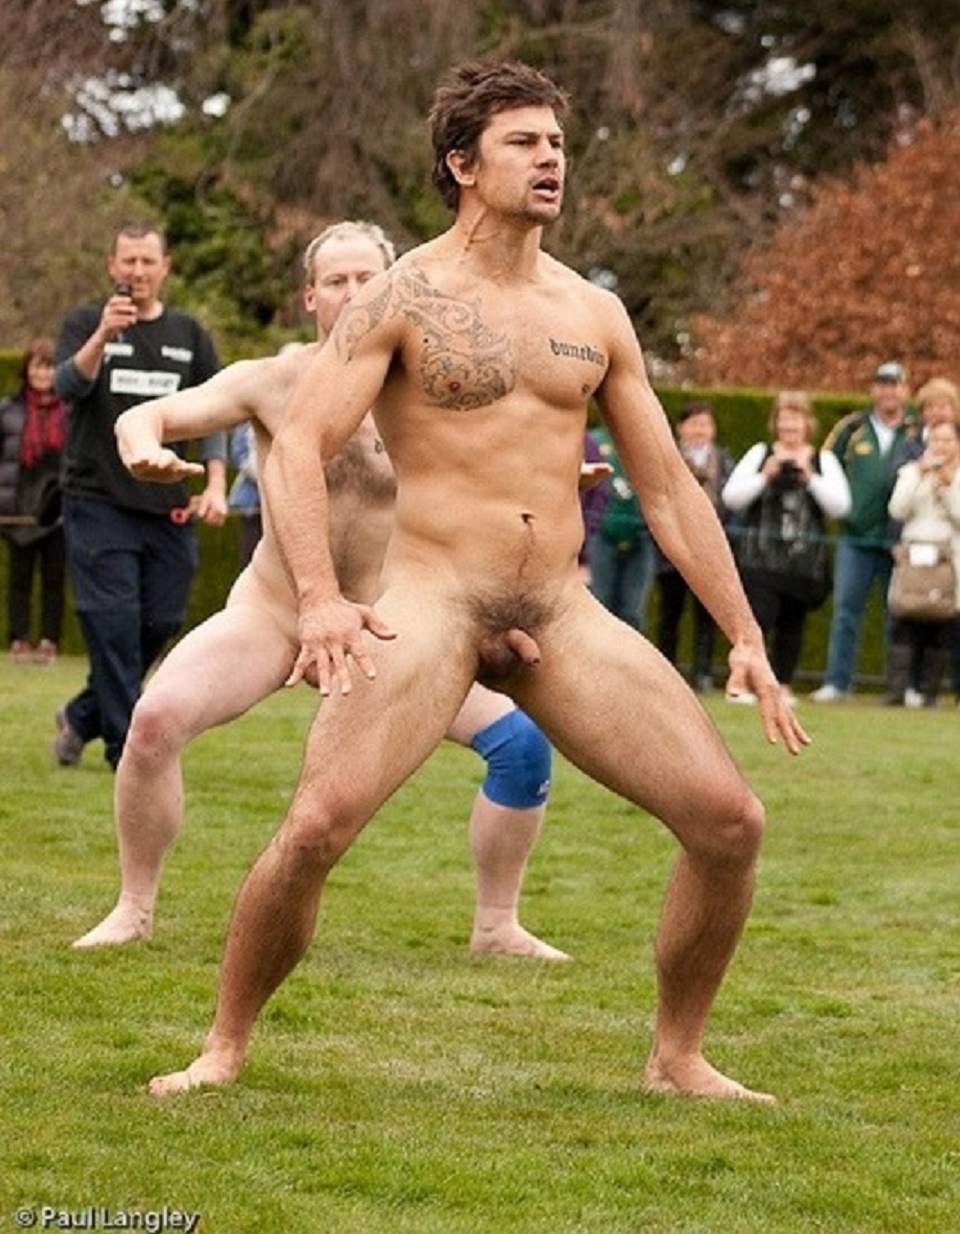 Guys playing sports naked